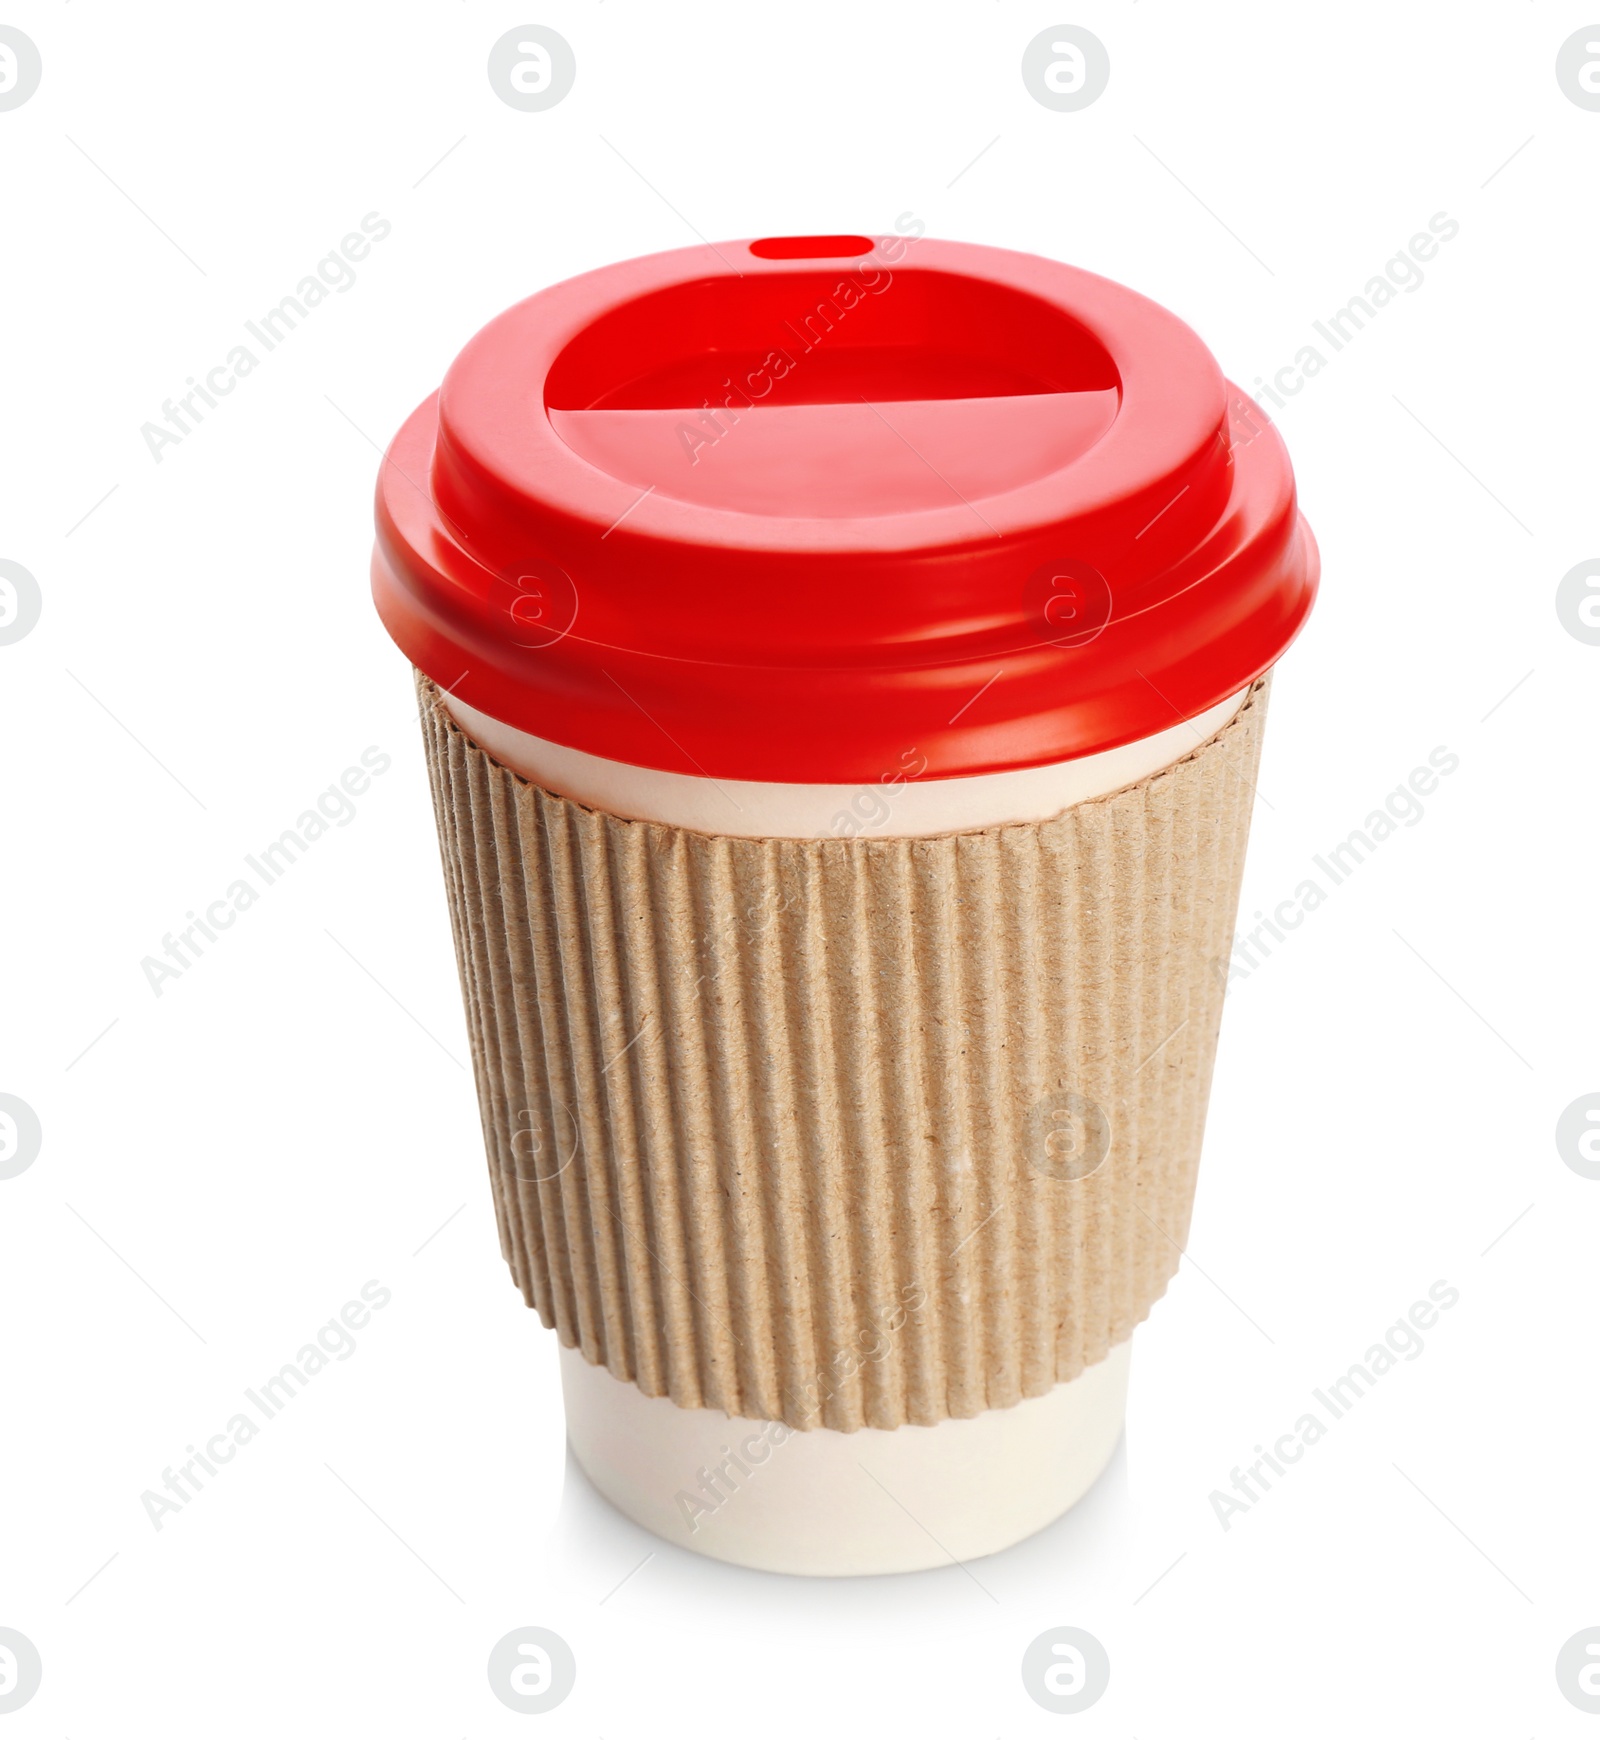 Photo of Takeaway paper coffee cup with lid and cardboard sleeve on white background